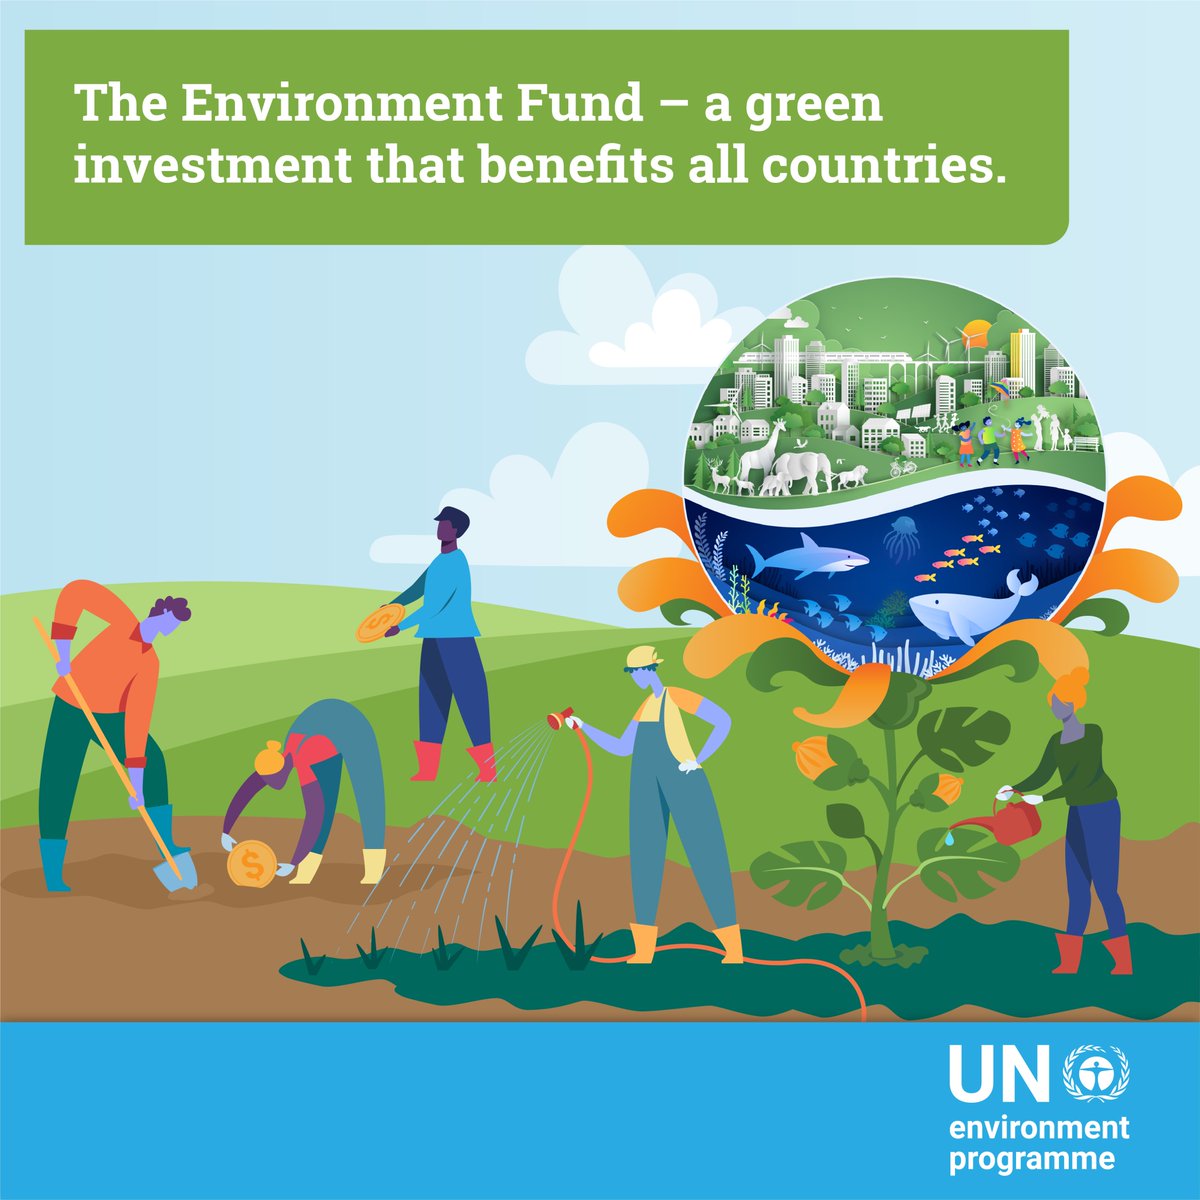 Big thanks to Japan 🇯🇵 for your generous contribution to the @UNEP #EnvironmentFund! 🌏
Your dedication to promoting biodiversity, renewable energy, and sustainable practices is inspiring. Together, let's pave the way for a healthier planet! #TheFutureweWant. @JapaninKenya